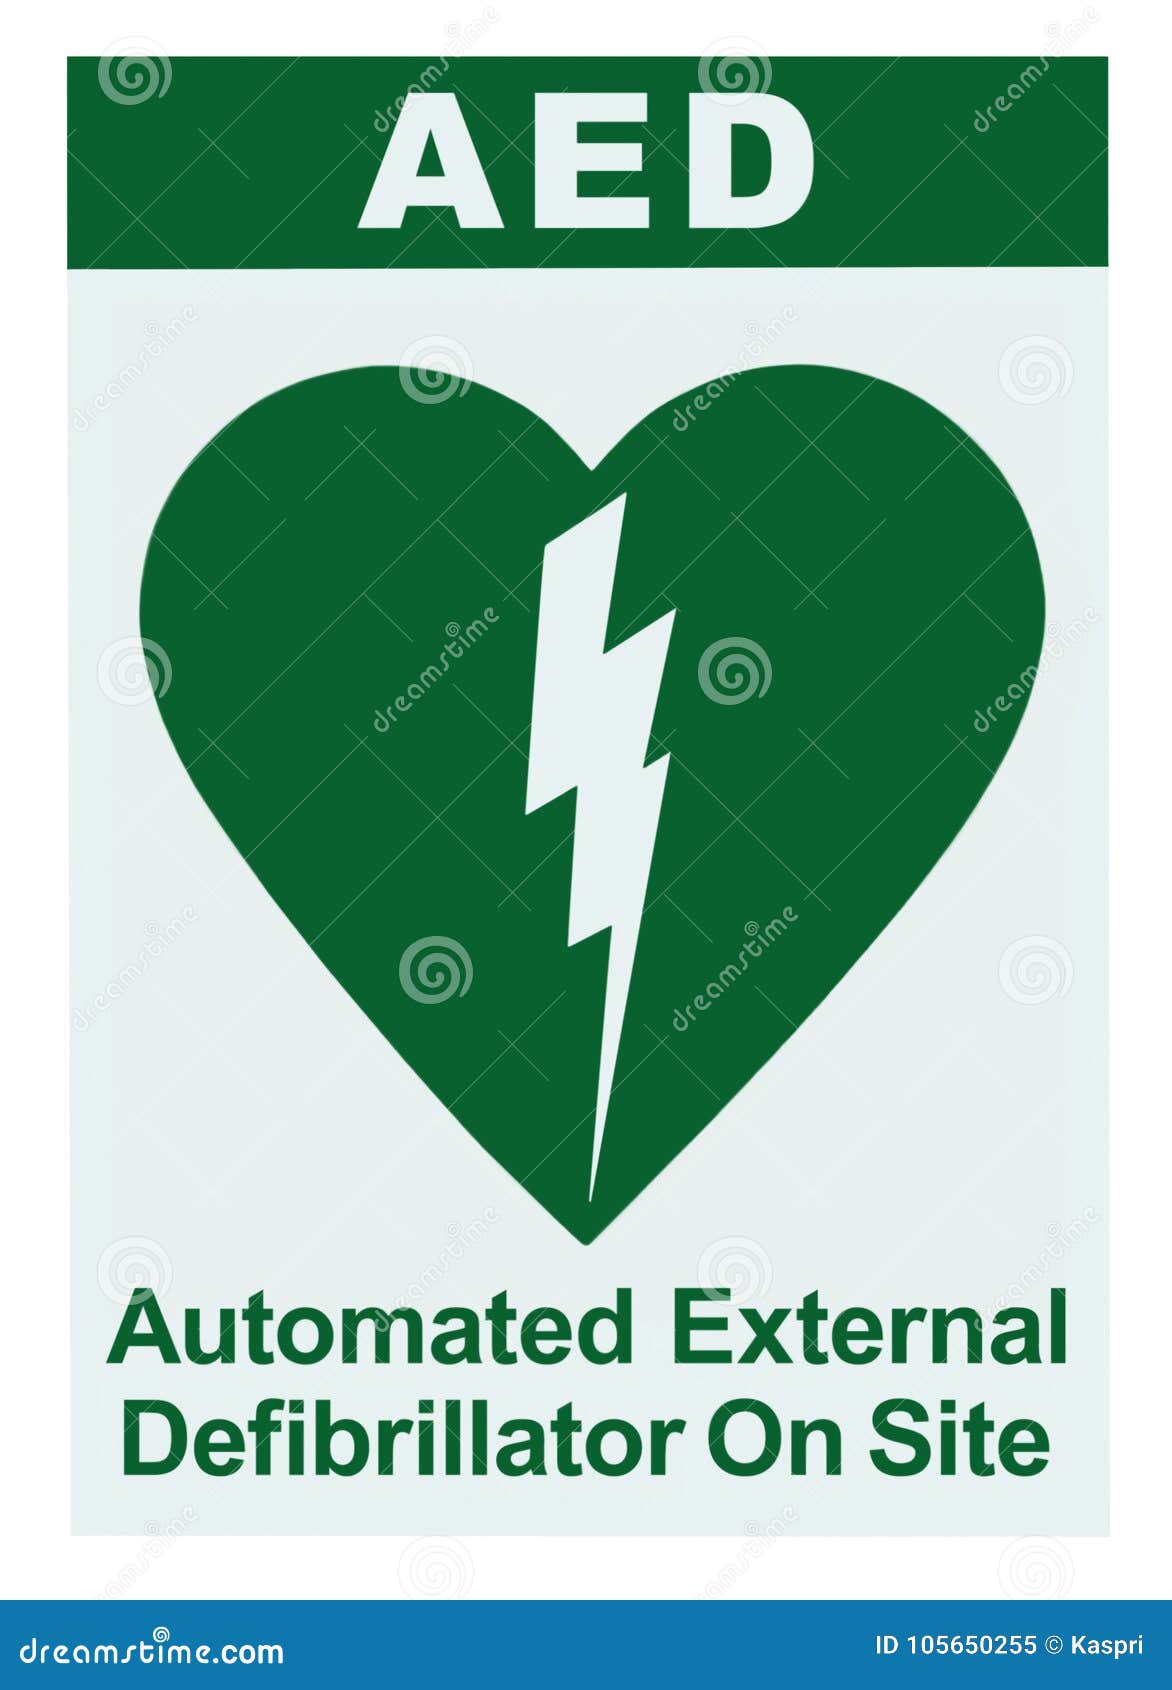 aed automated external defibrillator inside on site text, green icon, white sign sticker label  vertical, cardiopulmonary